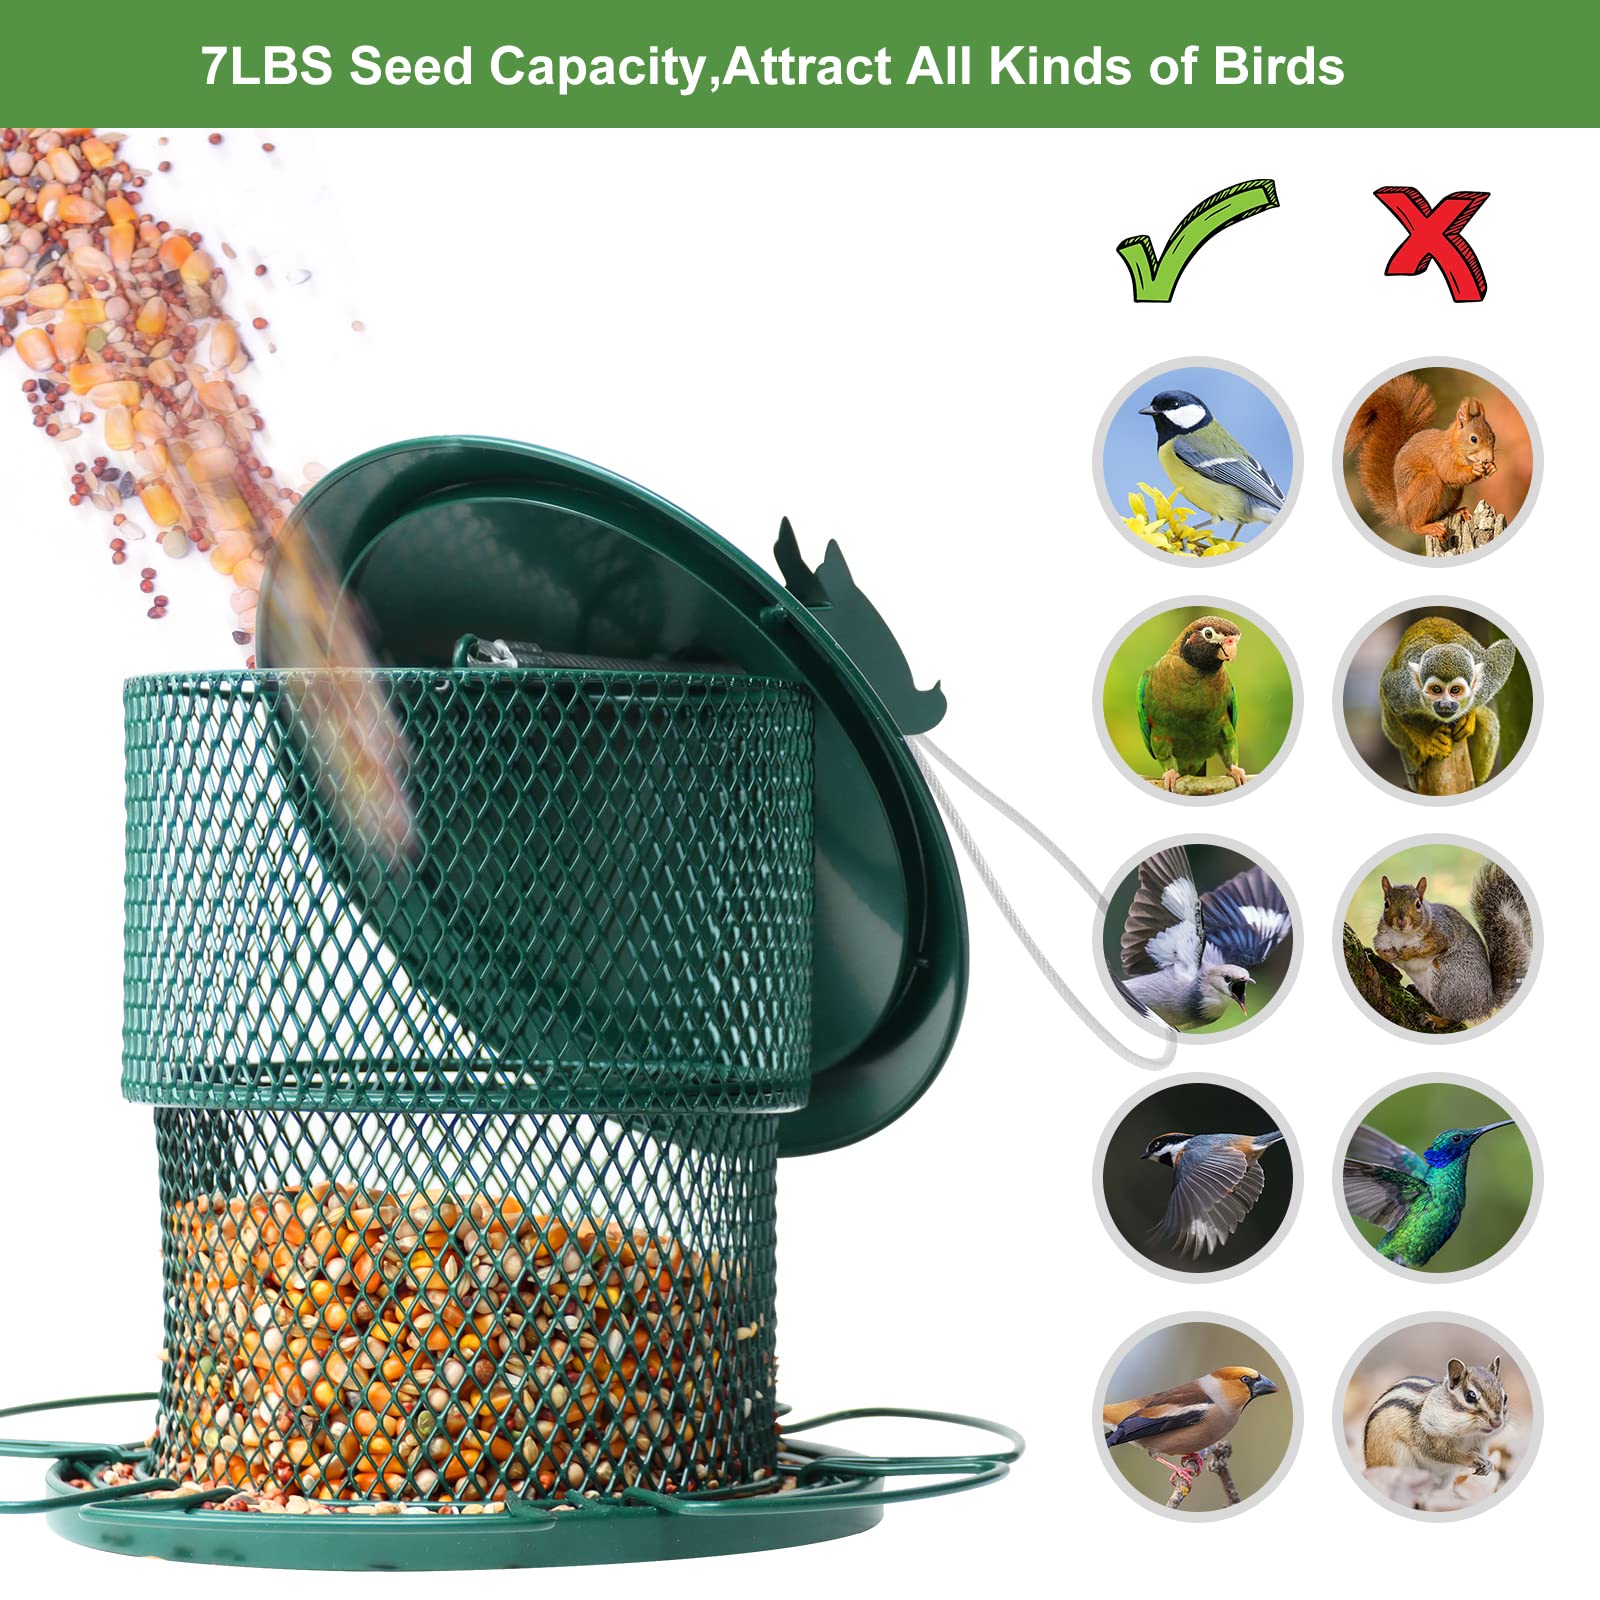 Bird Feeder for Outside Hanging,Squirrel Proof Metal Bird Feeder for Outdoor Wild Birds, 7.4 lb Seed Large Capacity Retractable Hanging Bird Feeders for Cardinal, Finch, Sparrow, Chickadee etc(Green)